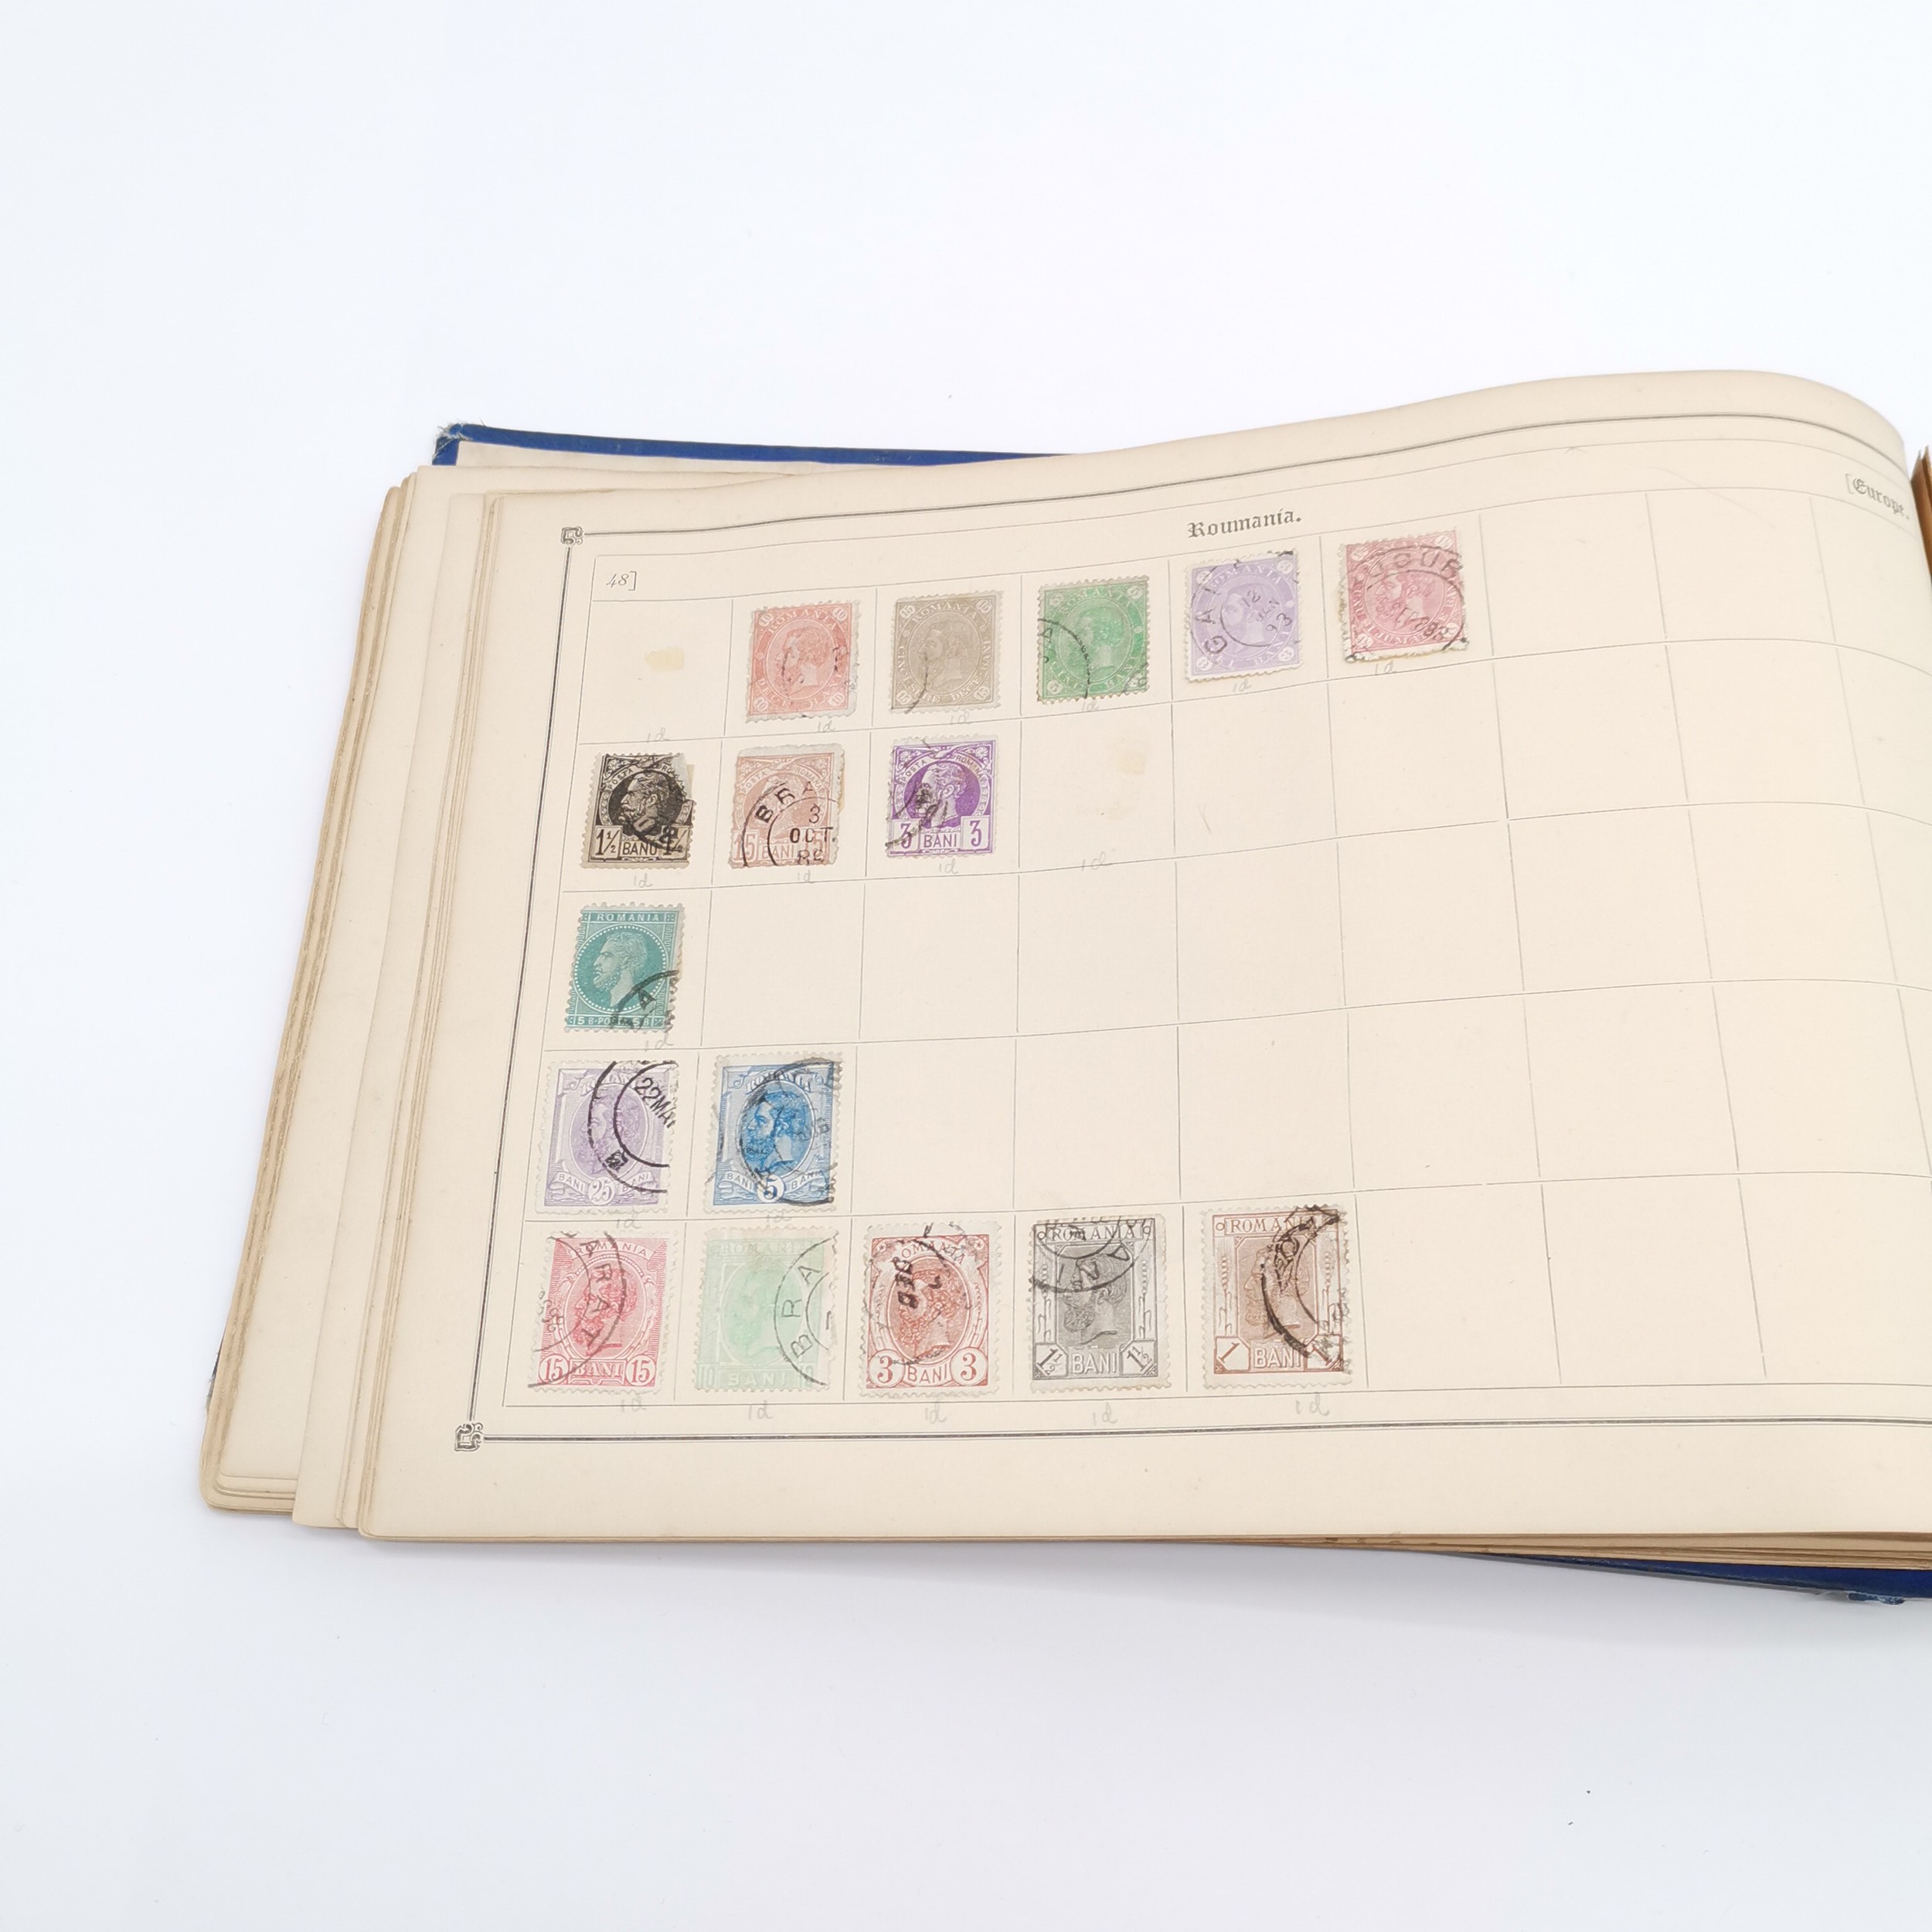 Cosmopolitan postage stamp album with useful collection inc GB 1d penny black, China dragon stamps & - Image 9 of 26